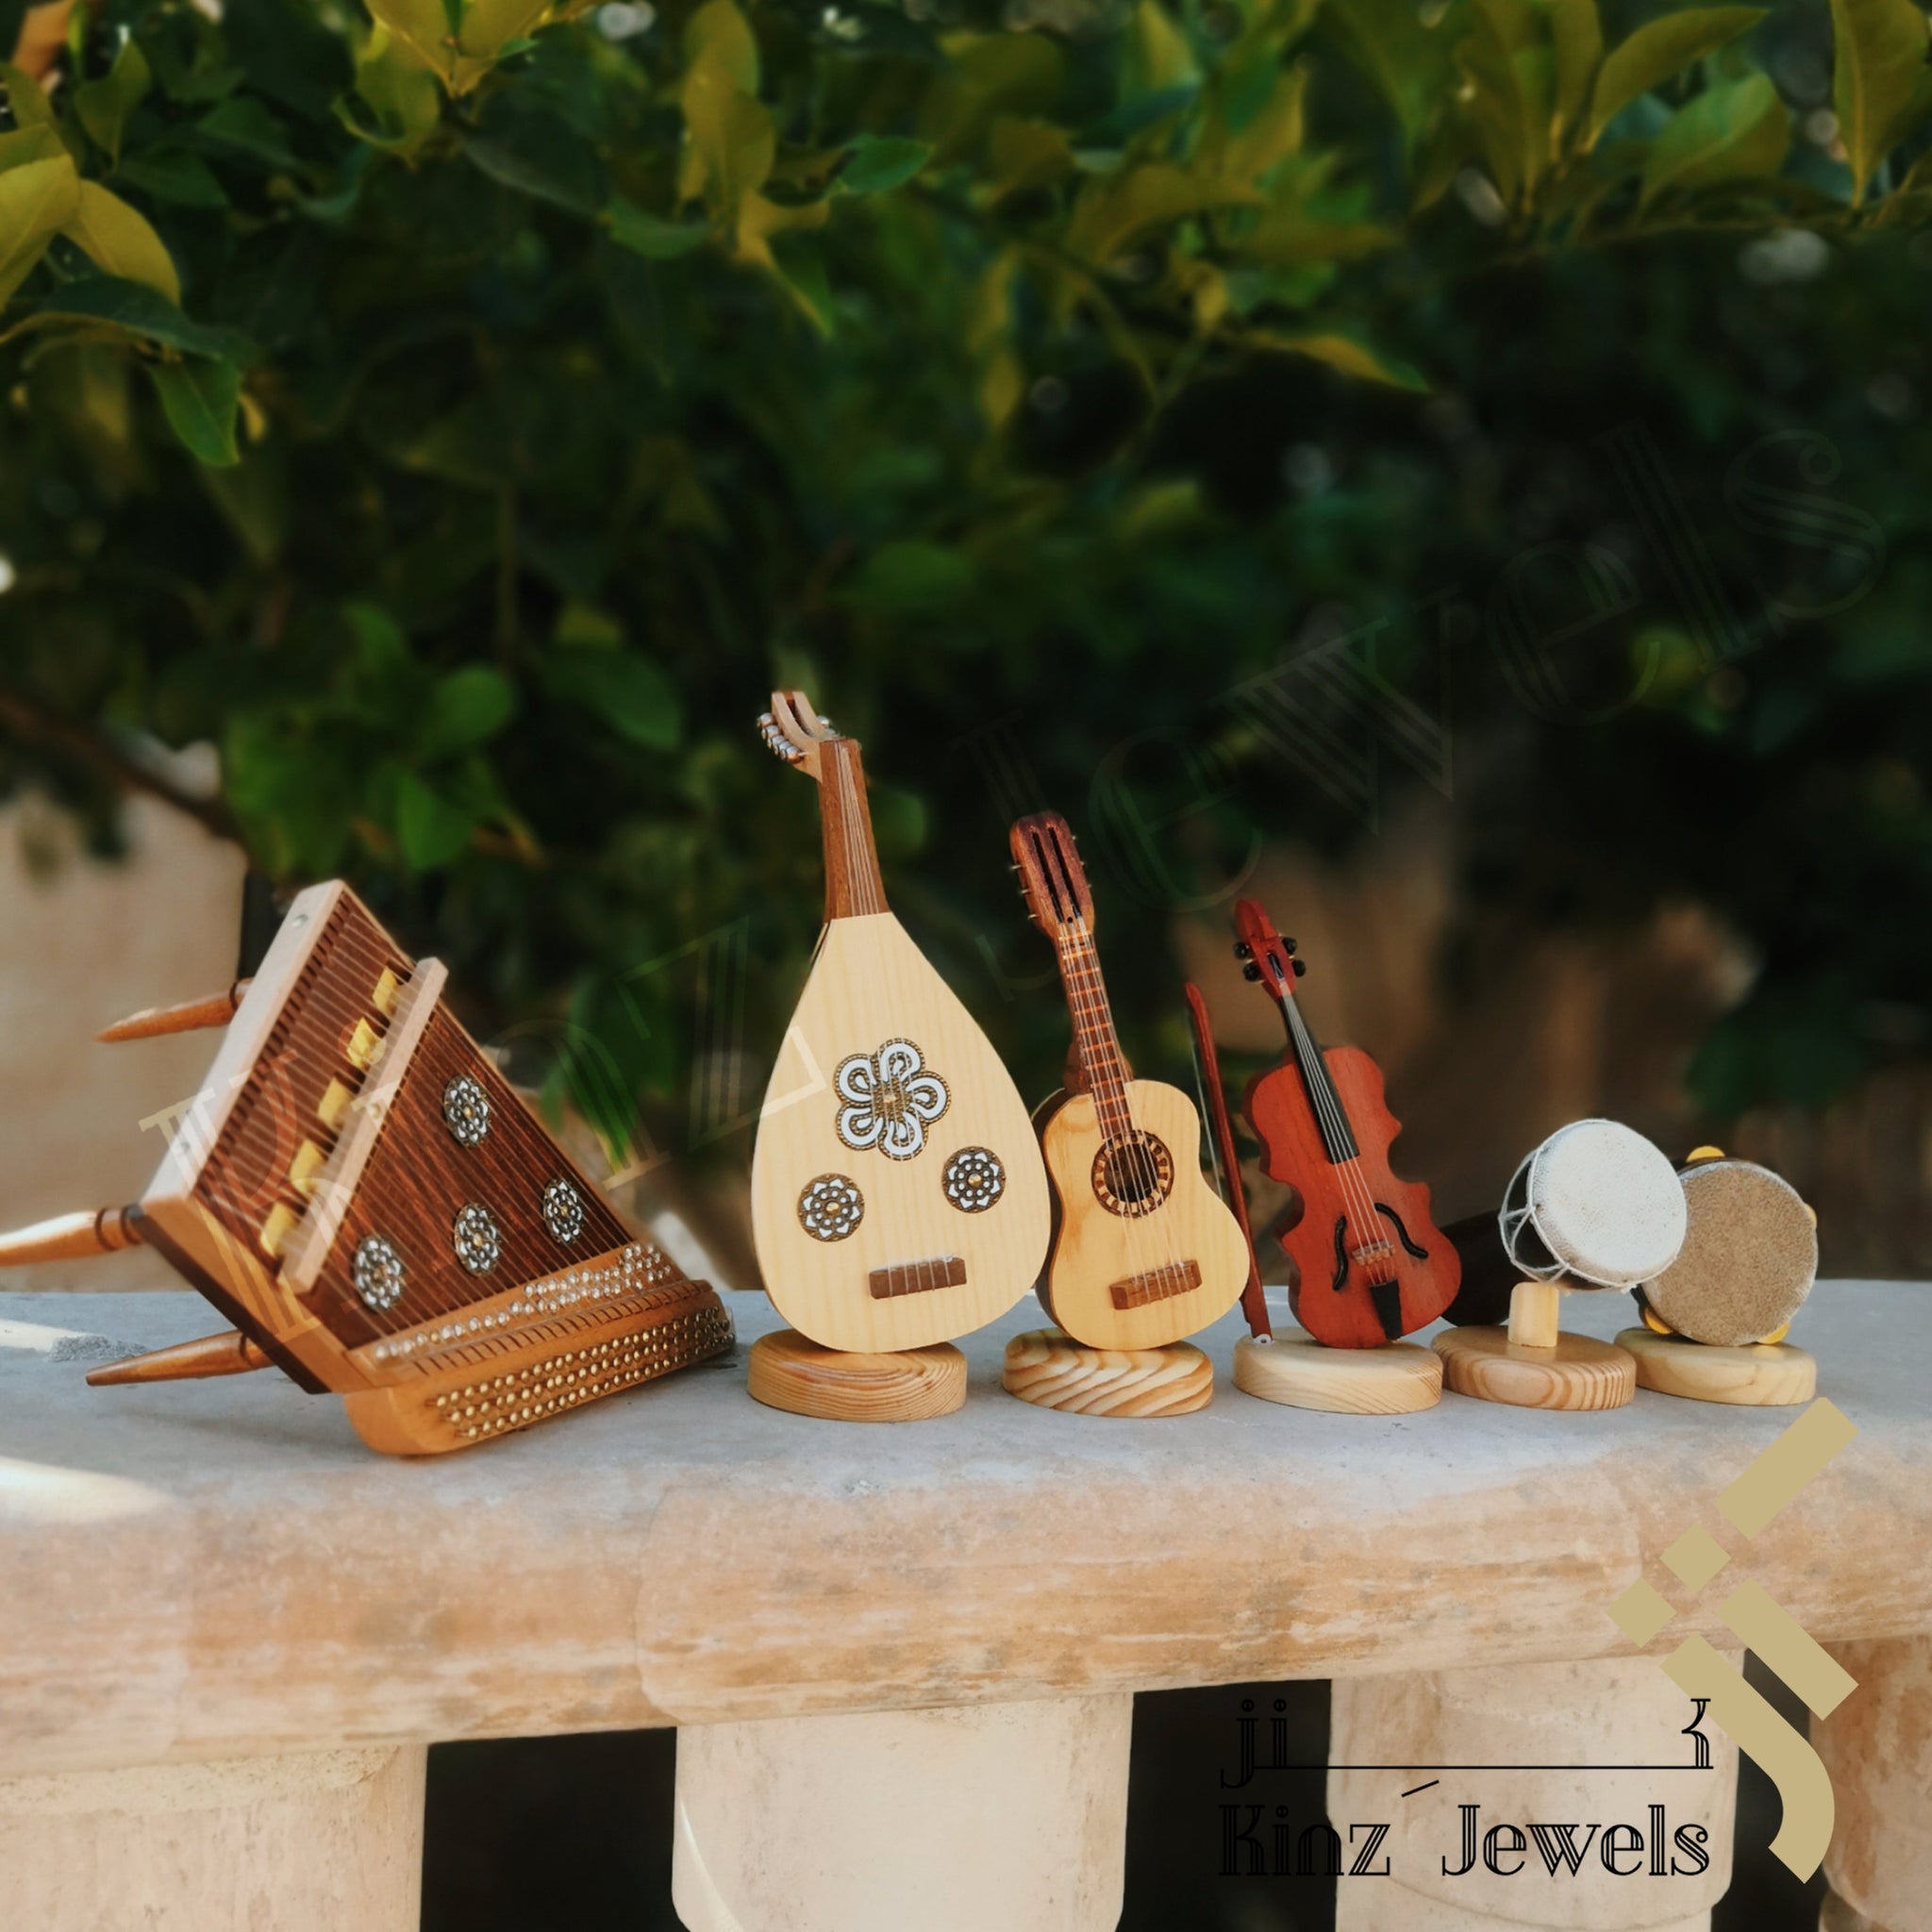 kinzjewels - Personalized SIX Wooden Musical Instruments Set With Wooden Box